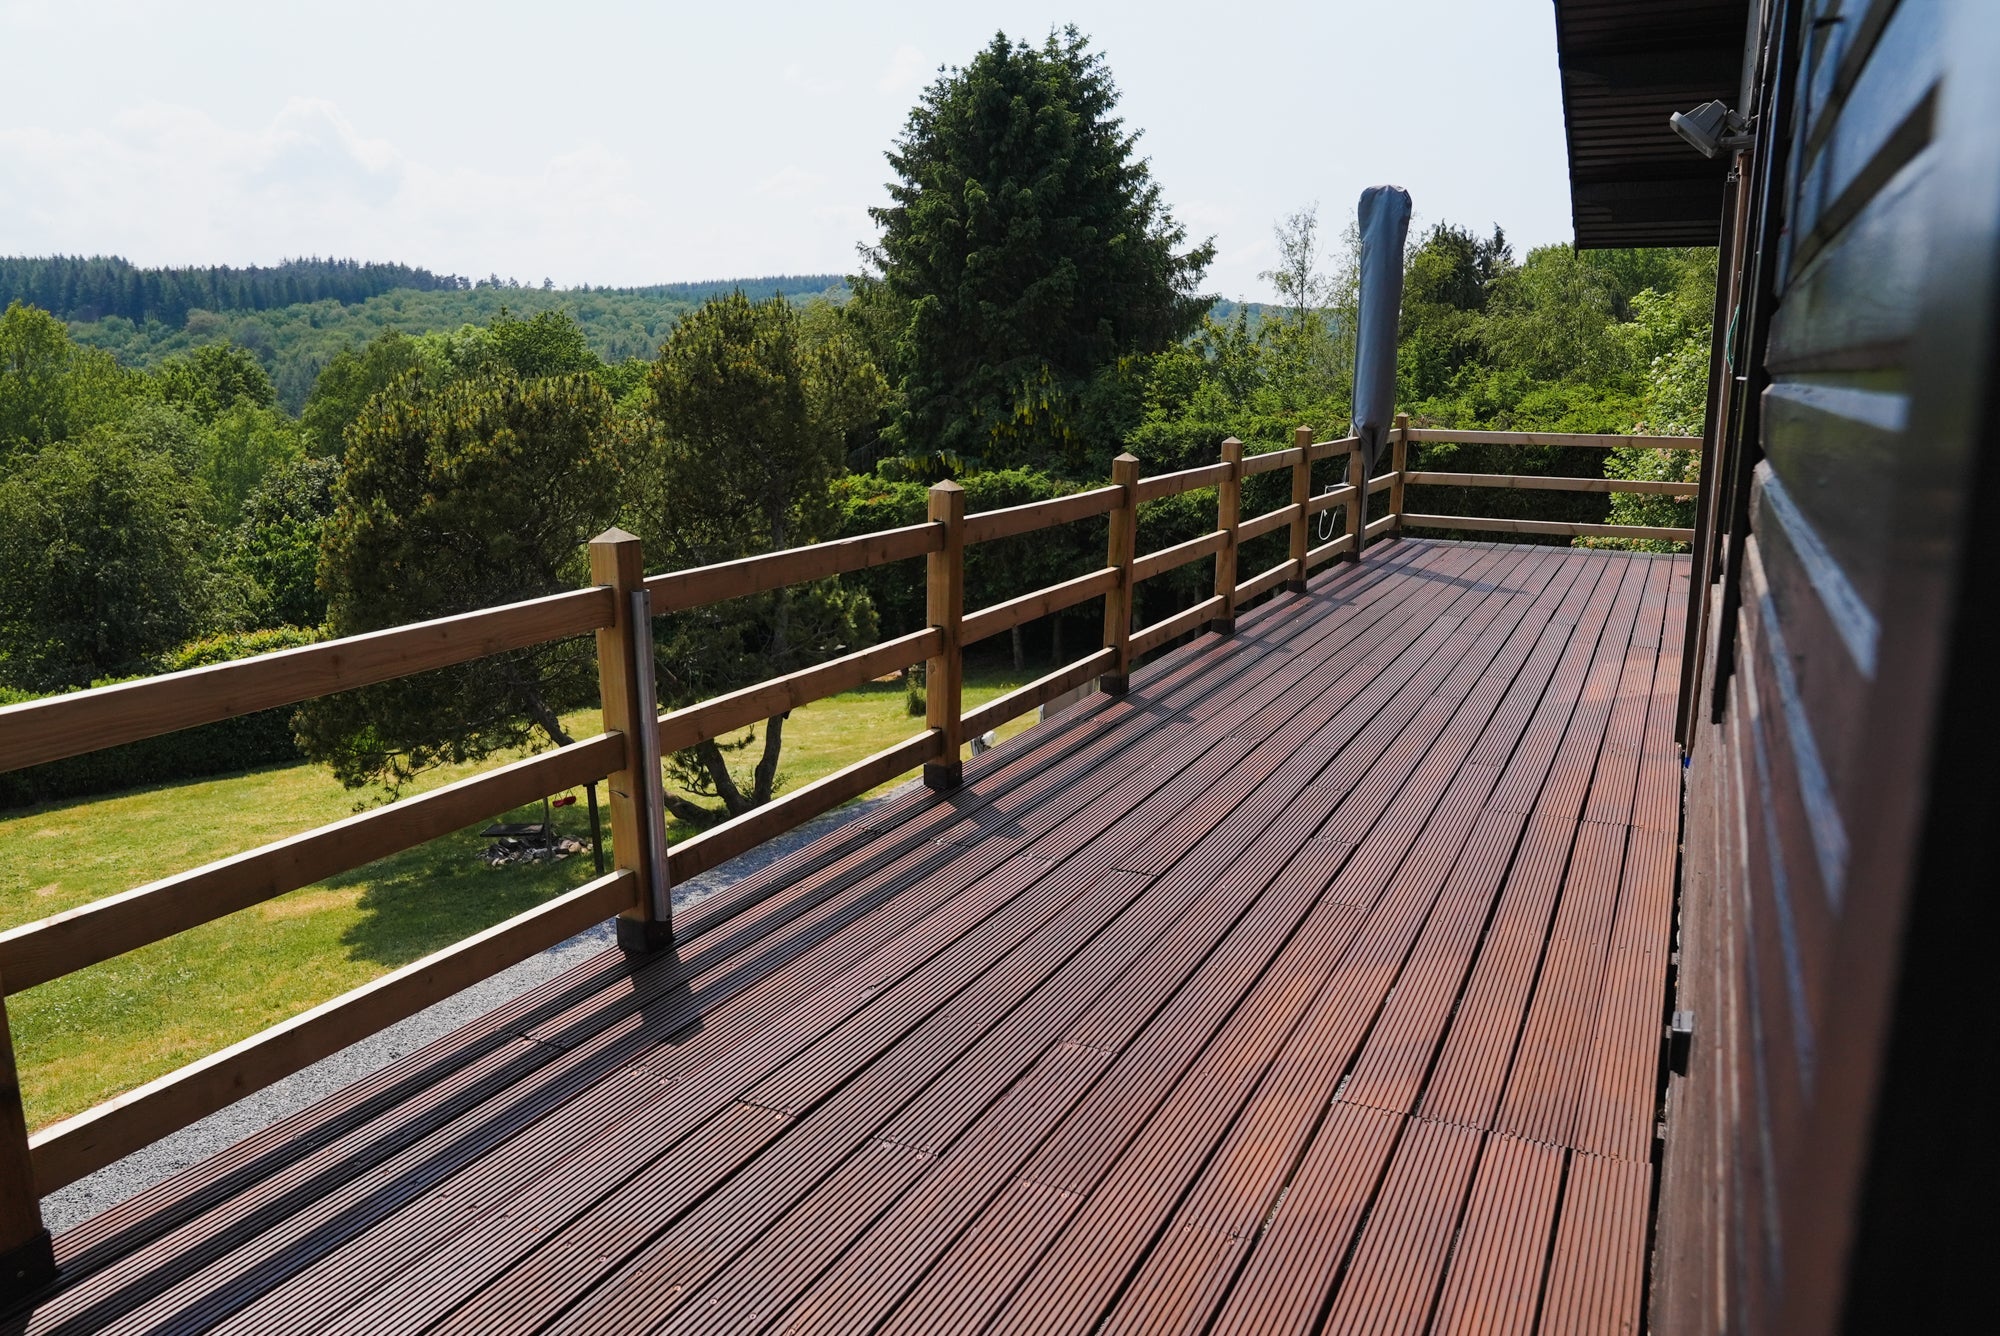 DuroGrit was used to color and protect this wood deck in one single coat. It gave it tough mechanical resistance and strong UV protection in just one application!